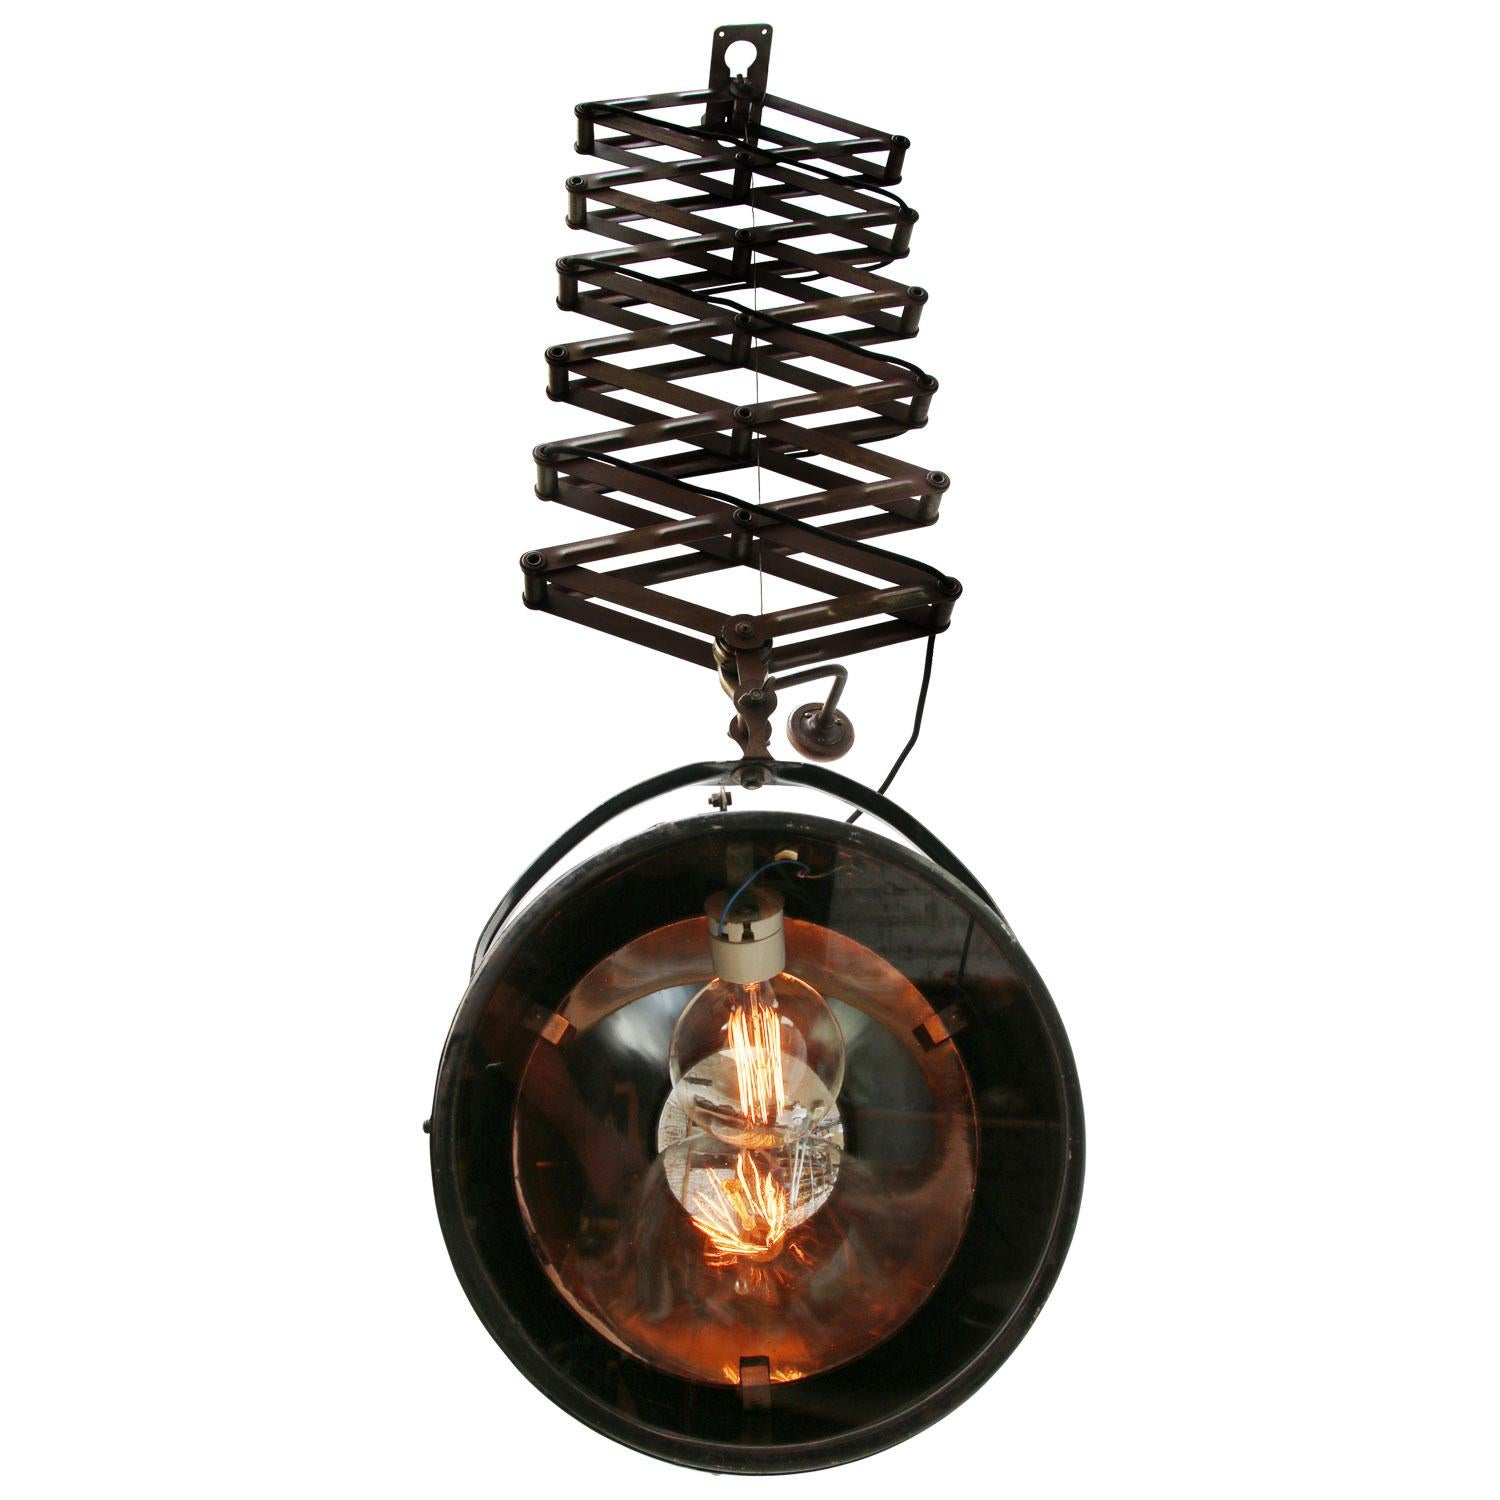 Scissor spring with Industrial theater hanging lamp.
Black metal. Silver metal reflector.
Lamp size: diameter 30 cm, height 250 cm

Weight: 11.00 kg / 24.3 lb

Priced per individual item. All lamps have been made suitable by international